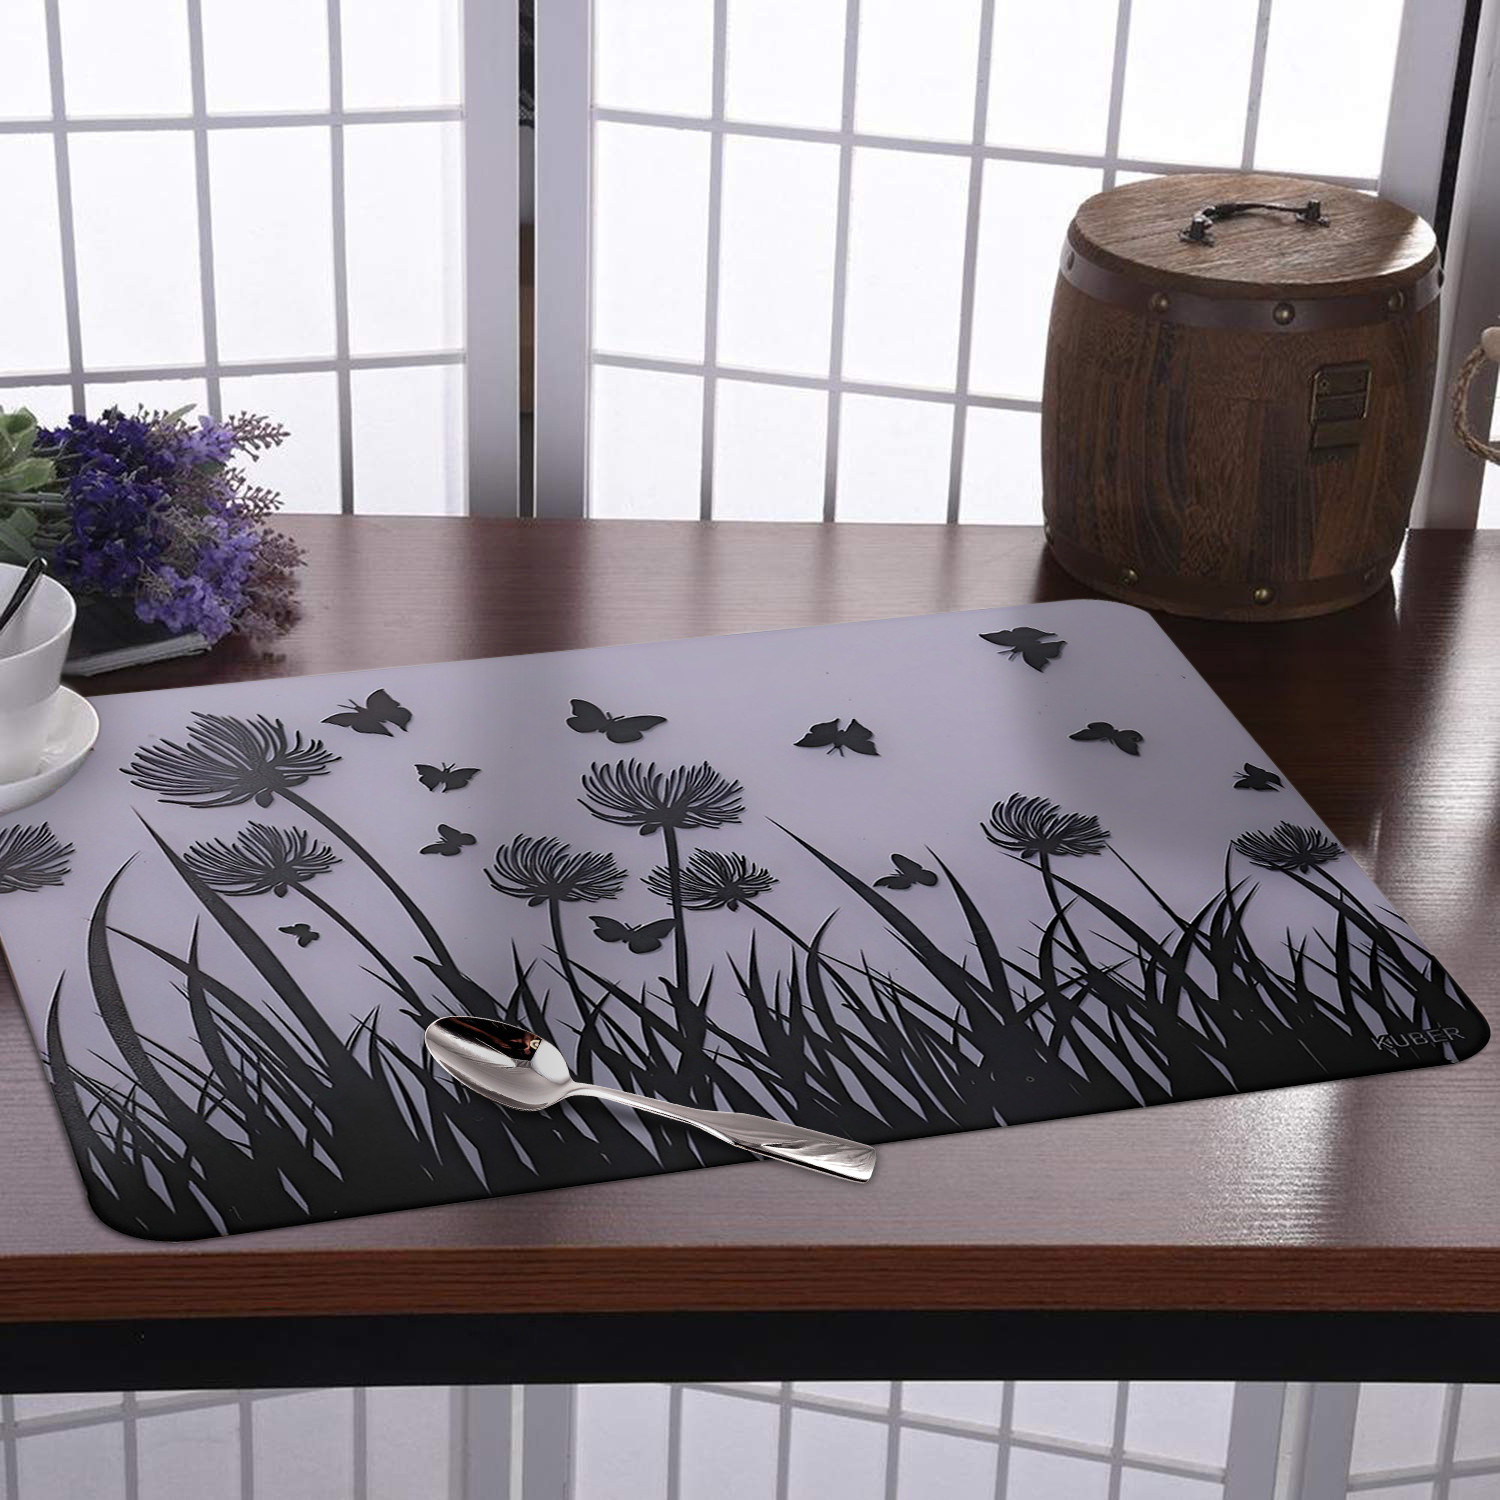 Kuber Industries Dining Table Mat | PVC Butterfly Trees Print | Table Mat | Placemats for Kitchen | Refrigerator Liners Mats | Shelf Liner Mat | Set of 6 | White